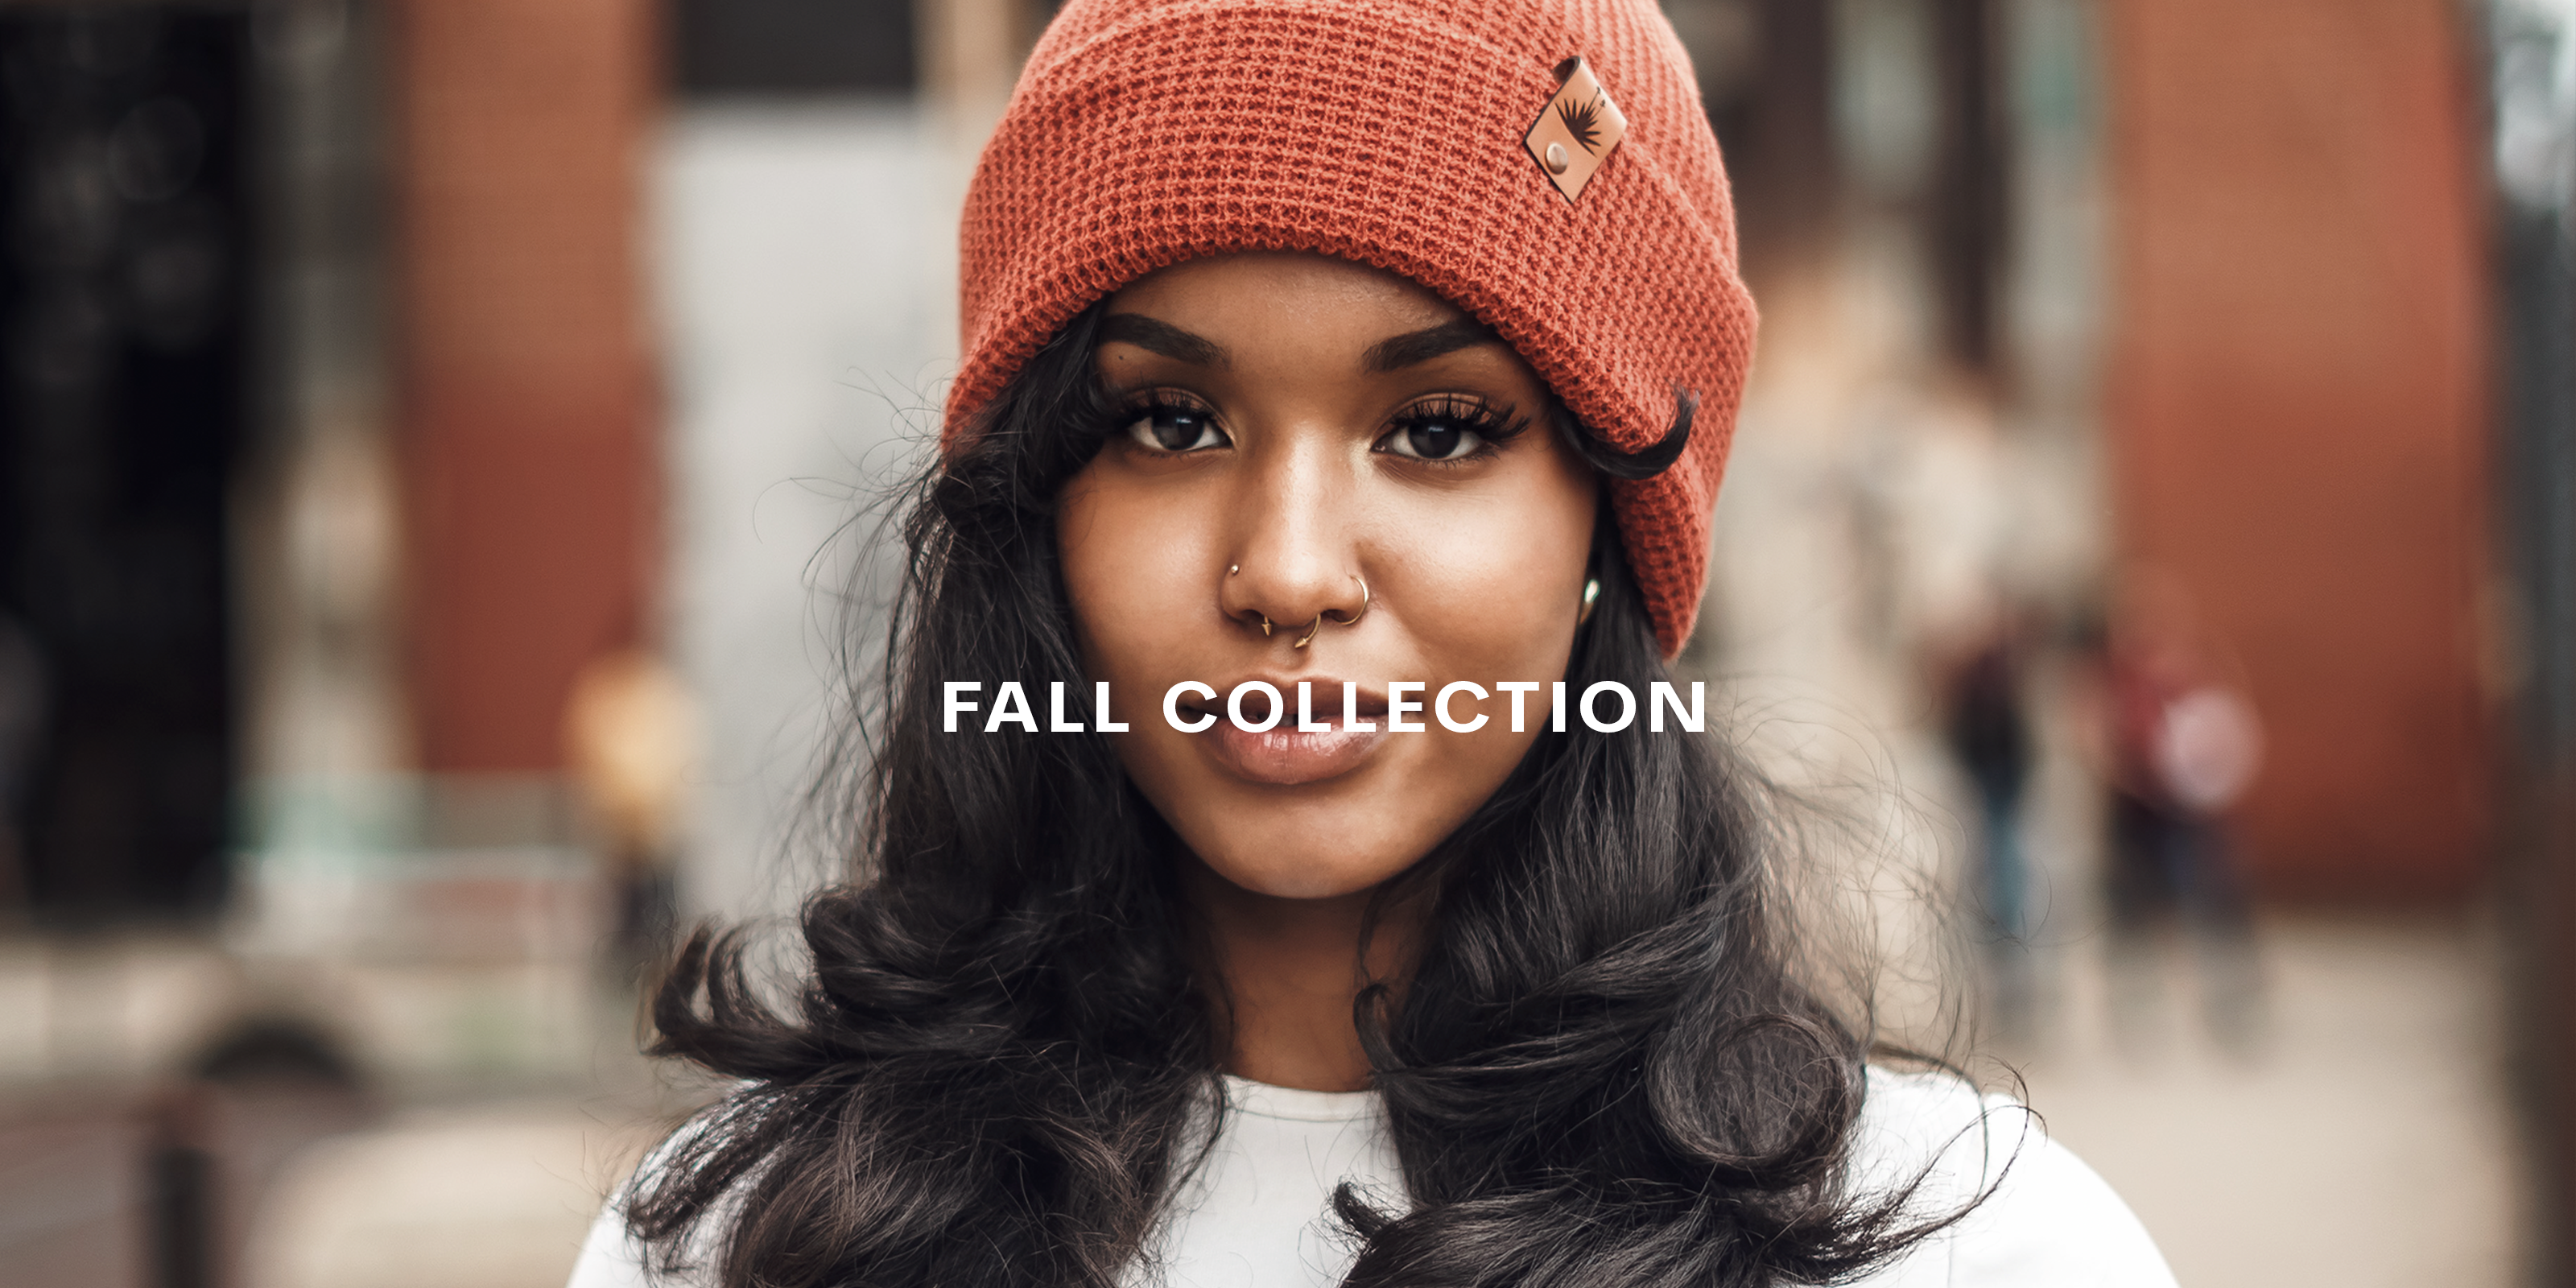 FALL COLLECTION